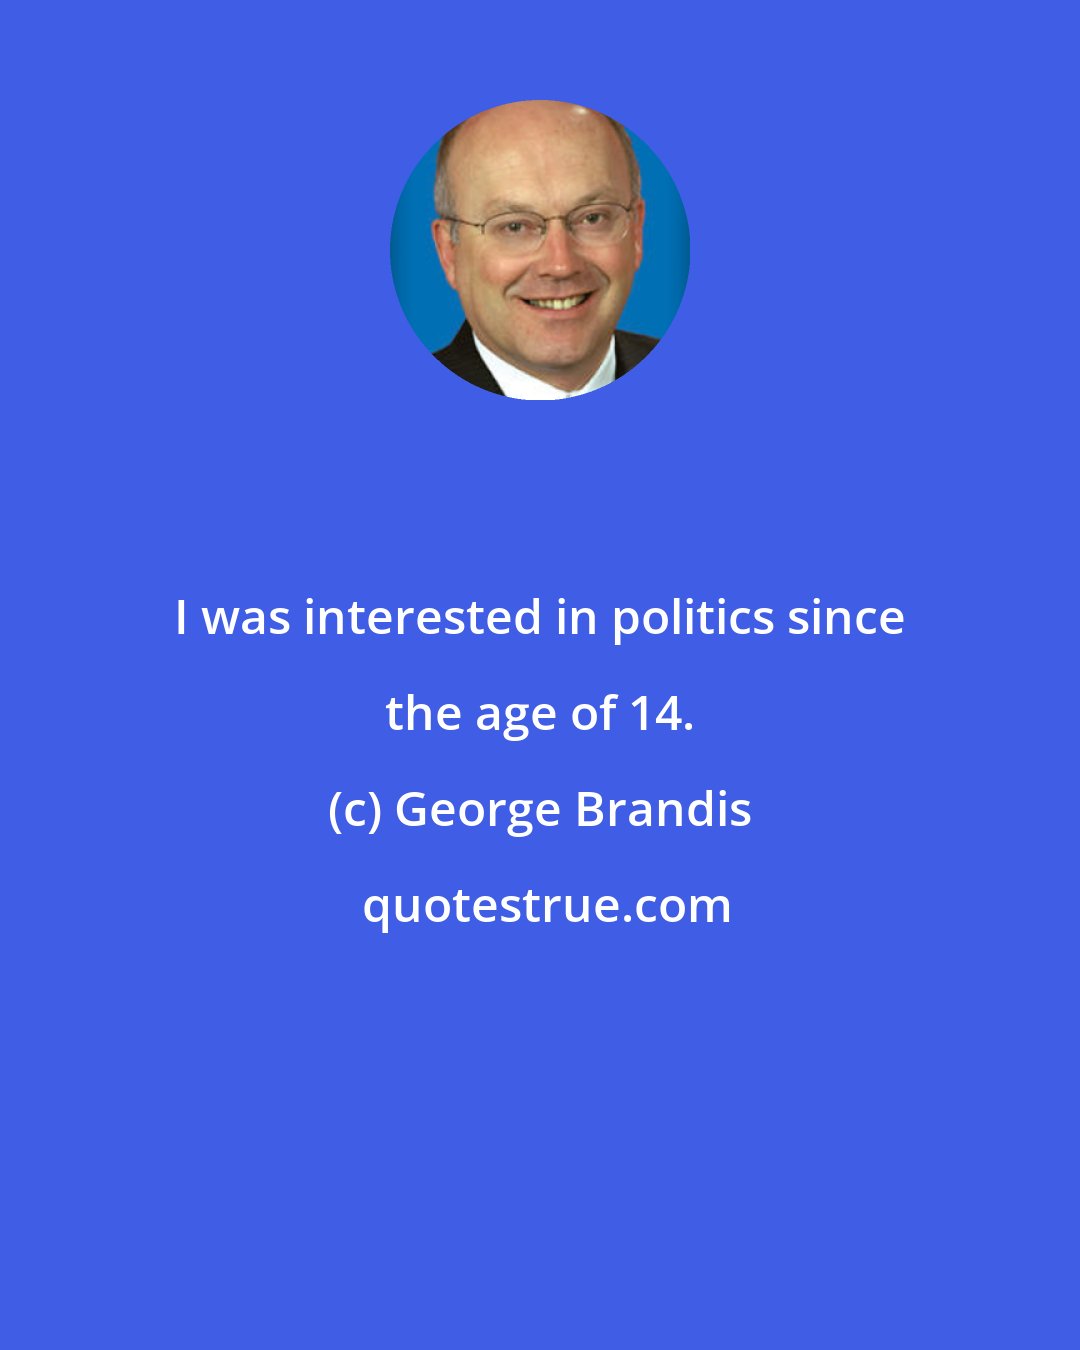 George Brandis: I was interested in politics since the age of 14.